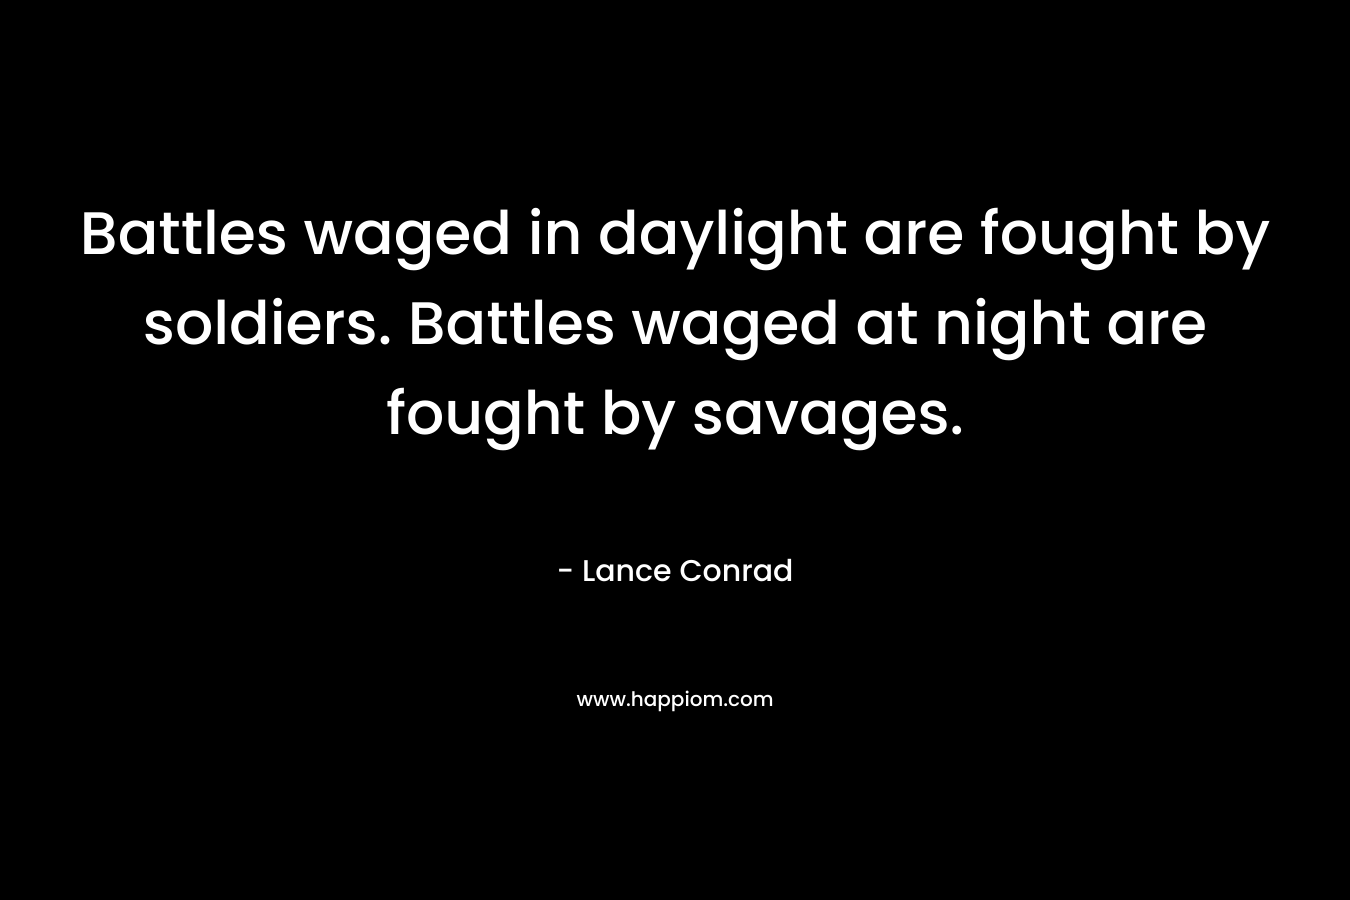 Battles waged in daylight are fought by soldiers. Battles waged at night are fought by savages.